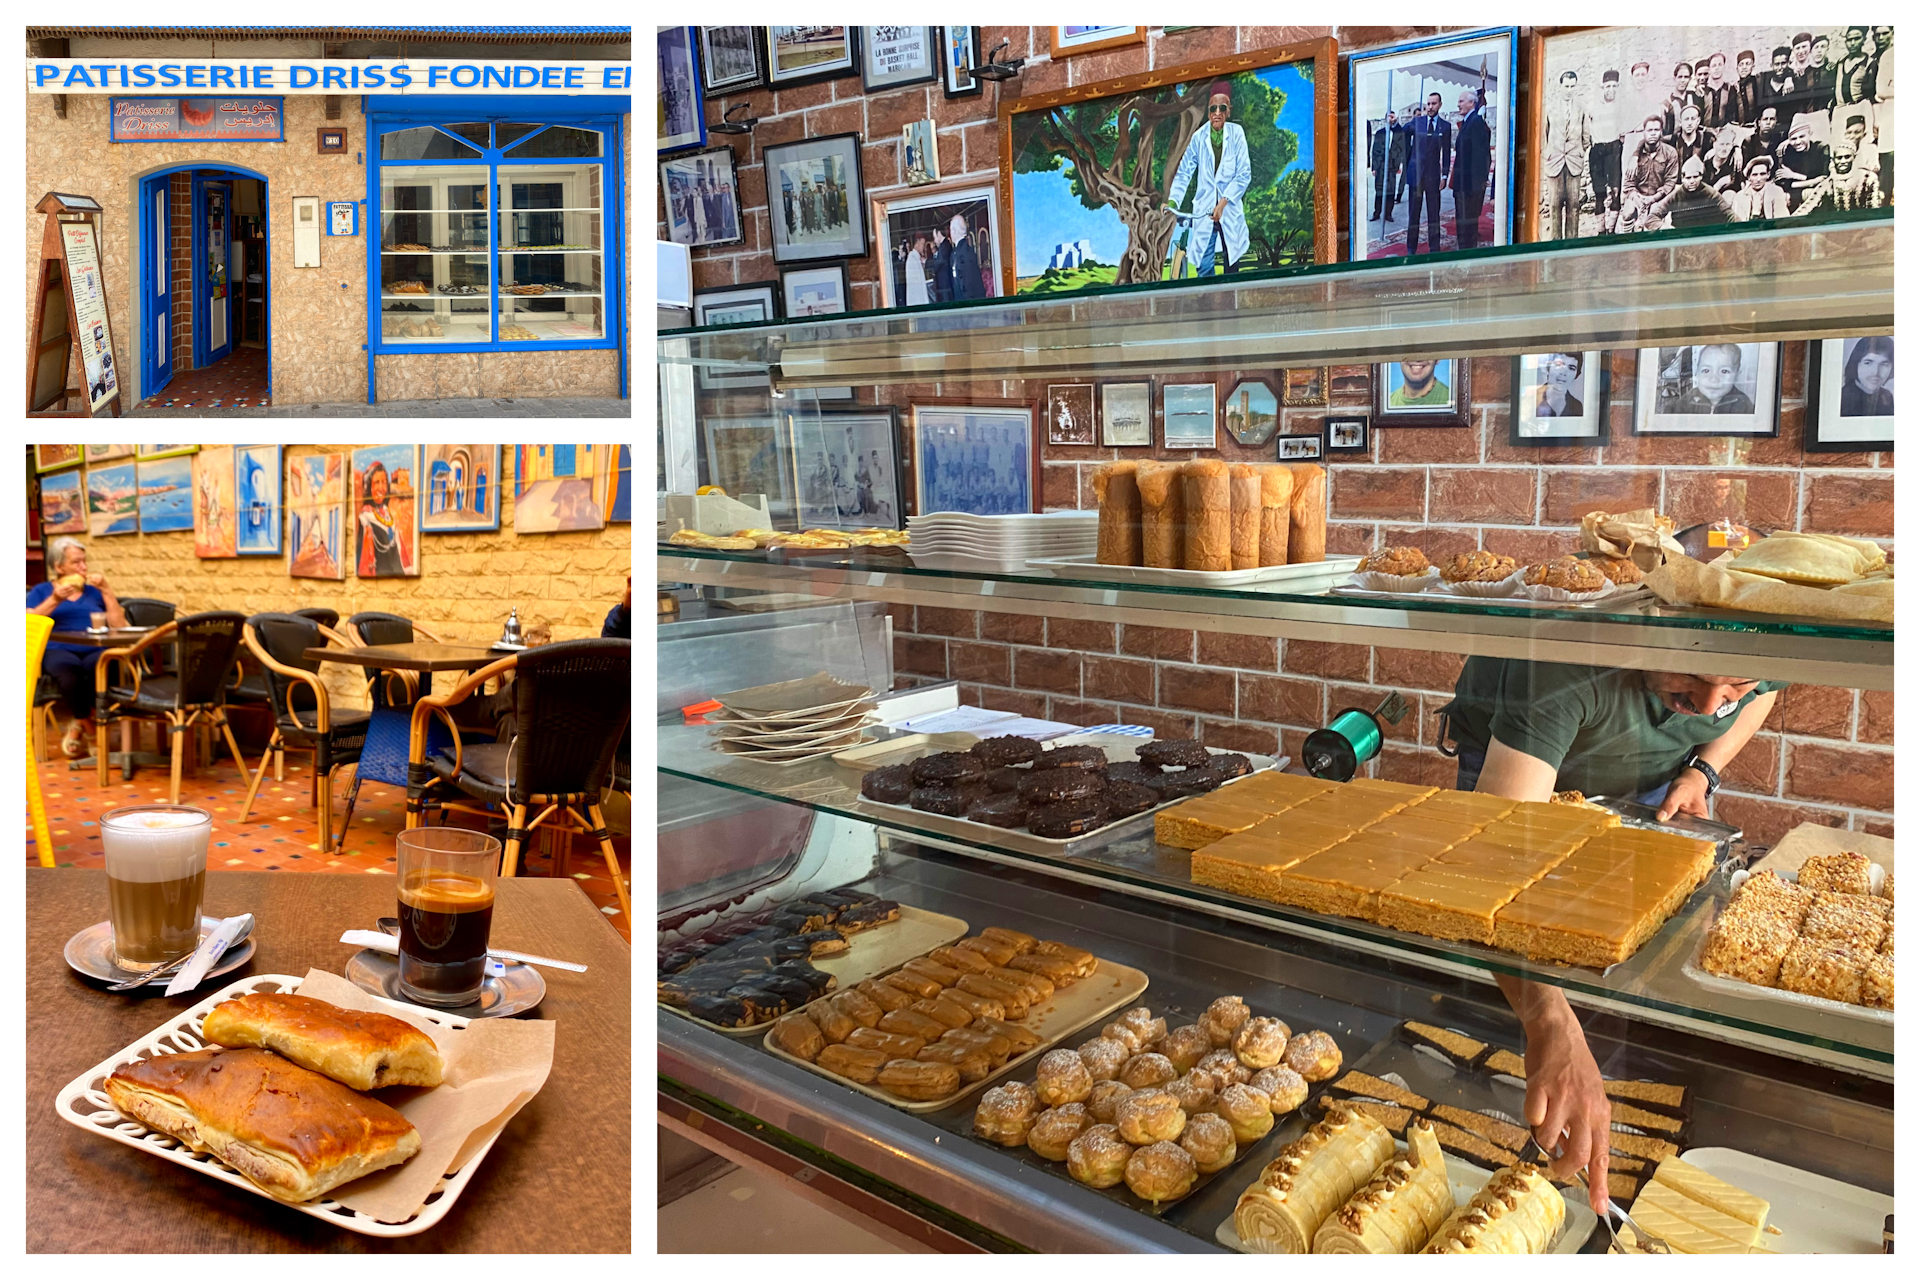 Interior and exterior shots of Patisserie Driss in Essaouira 